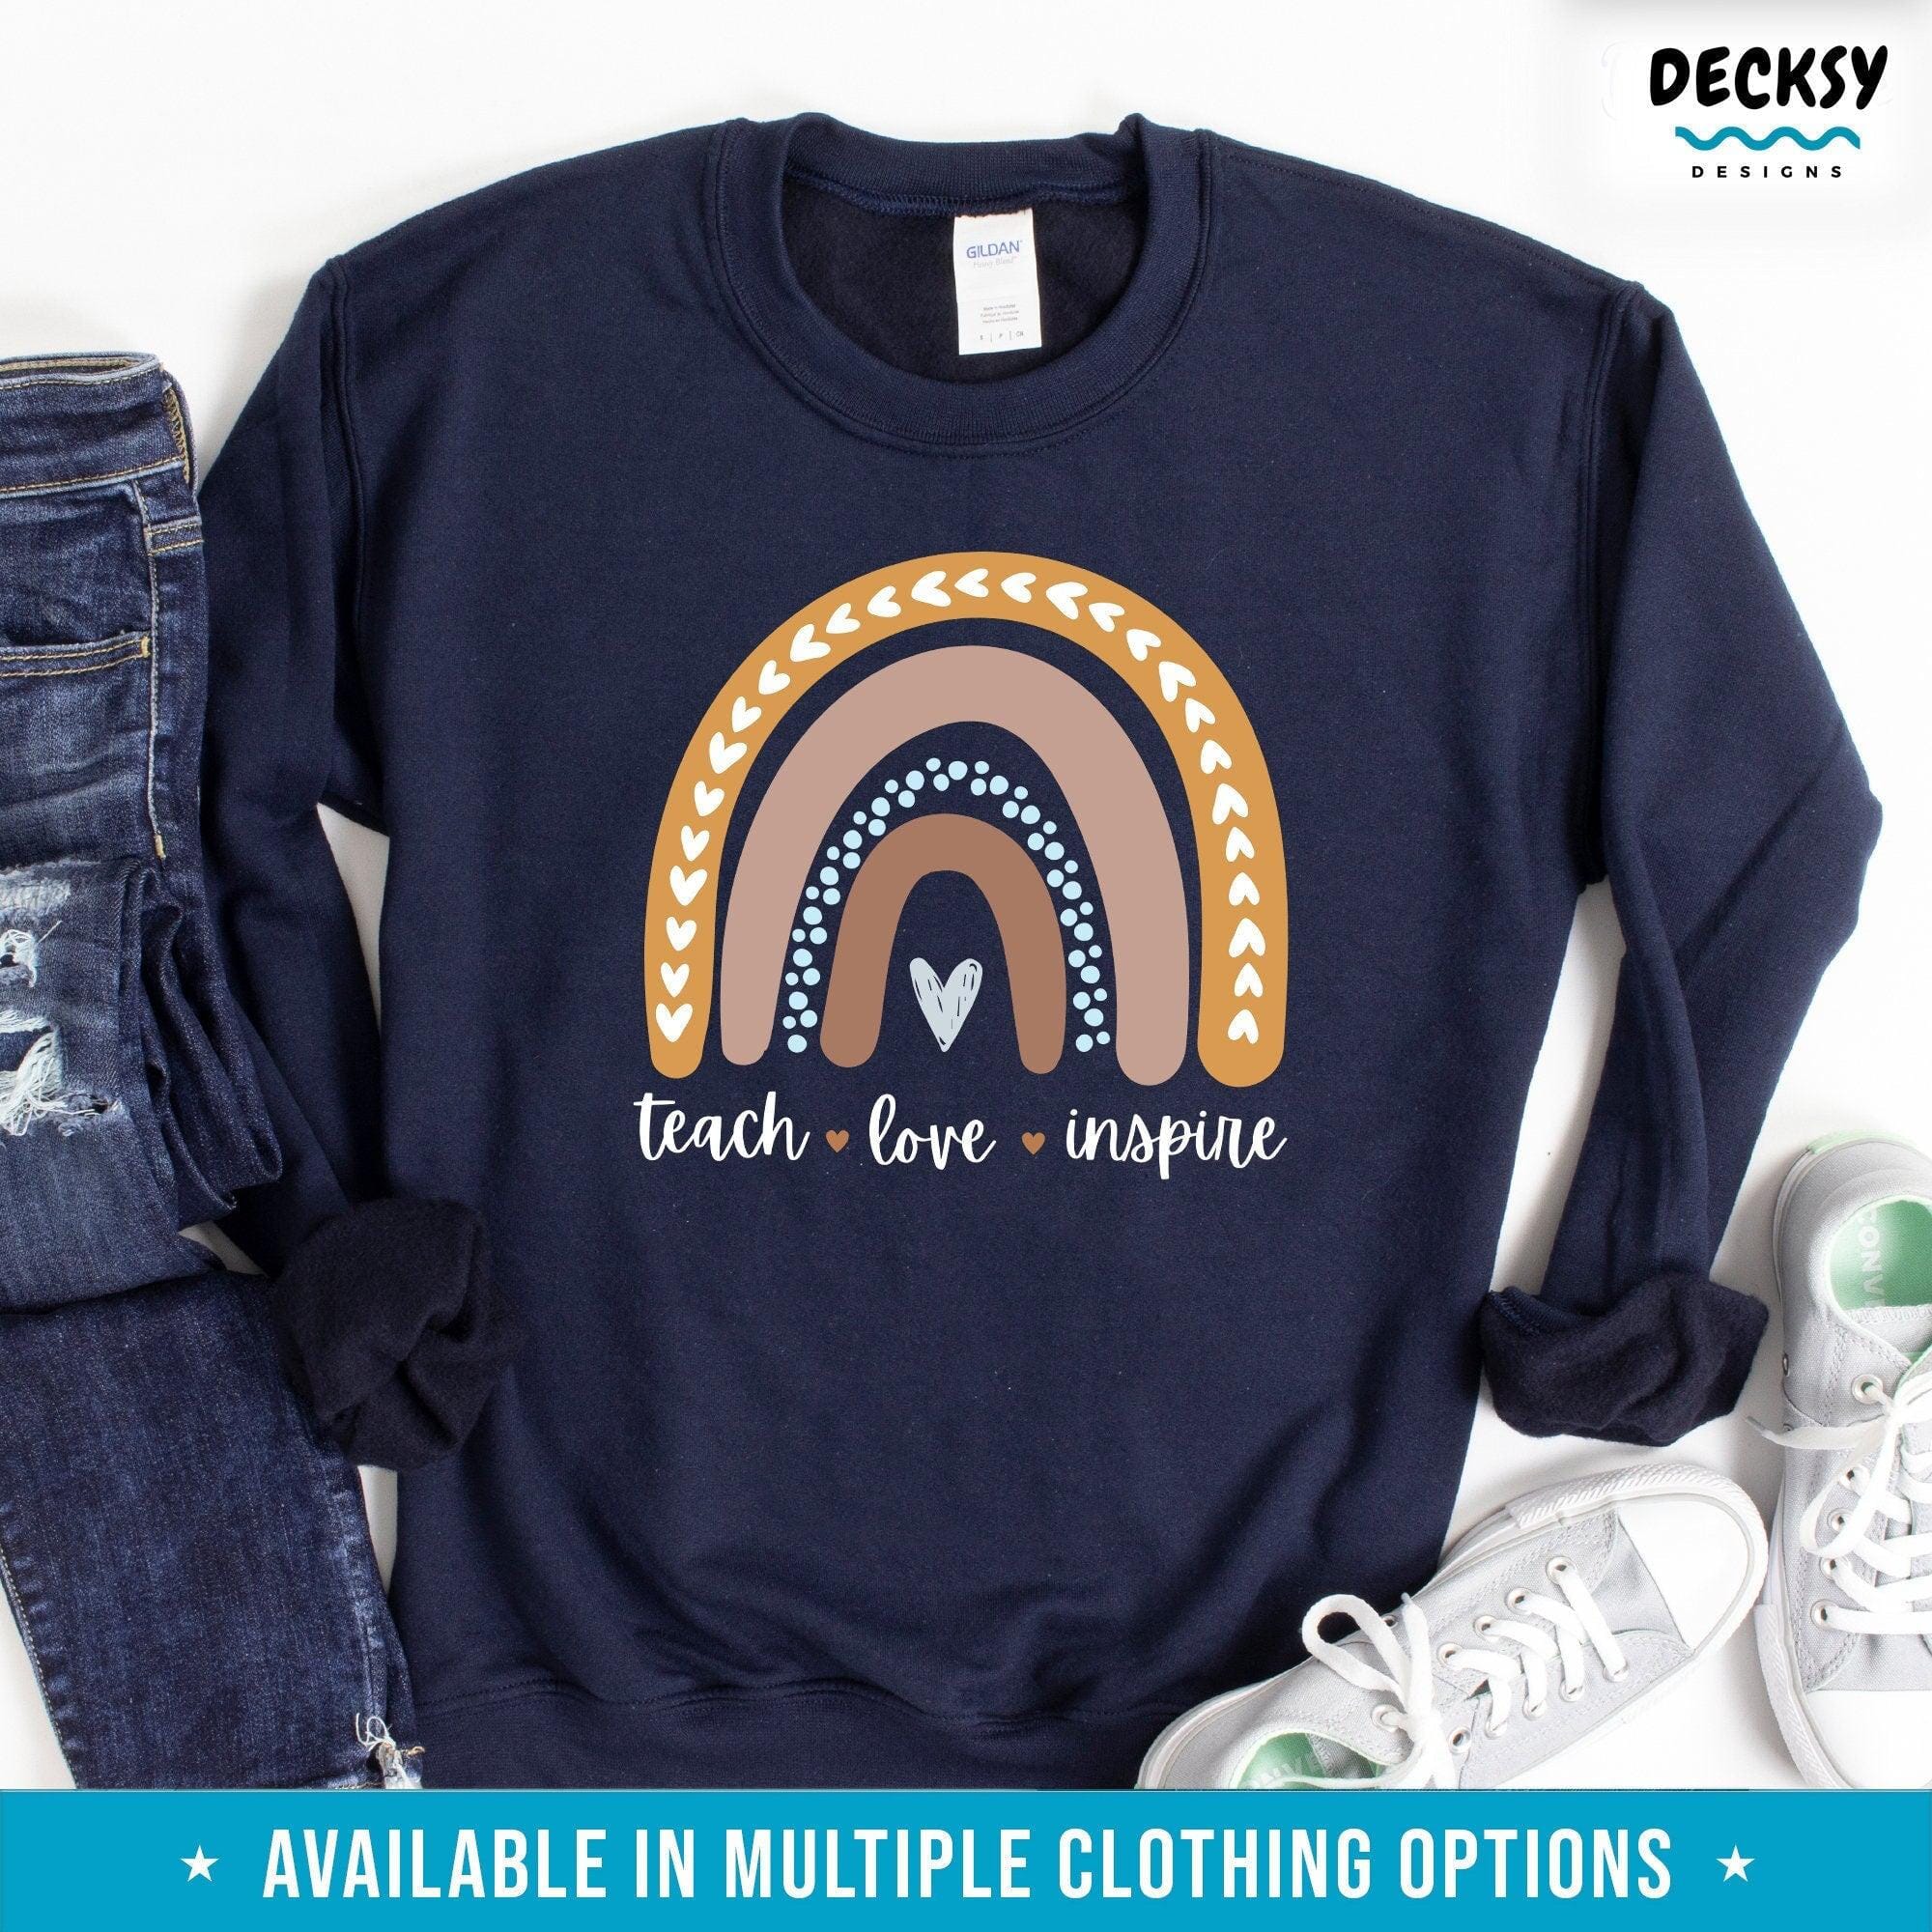 Teach Love Inspire Shirt, Gift for Teacher-Clothing:Gender-Neutral Adult Clothing:Tops & Tees:T-shirts:Graphic Tees-DecksyDesigns